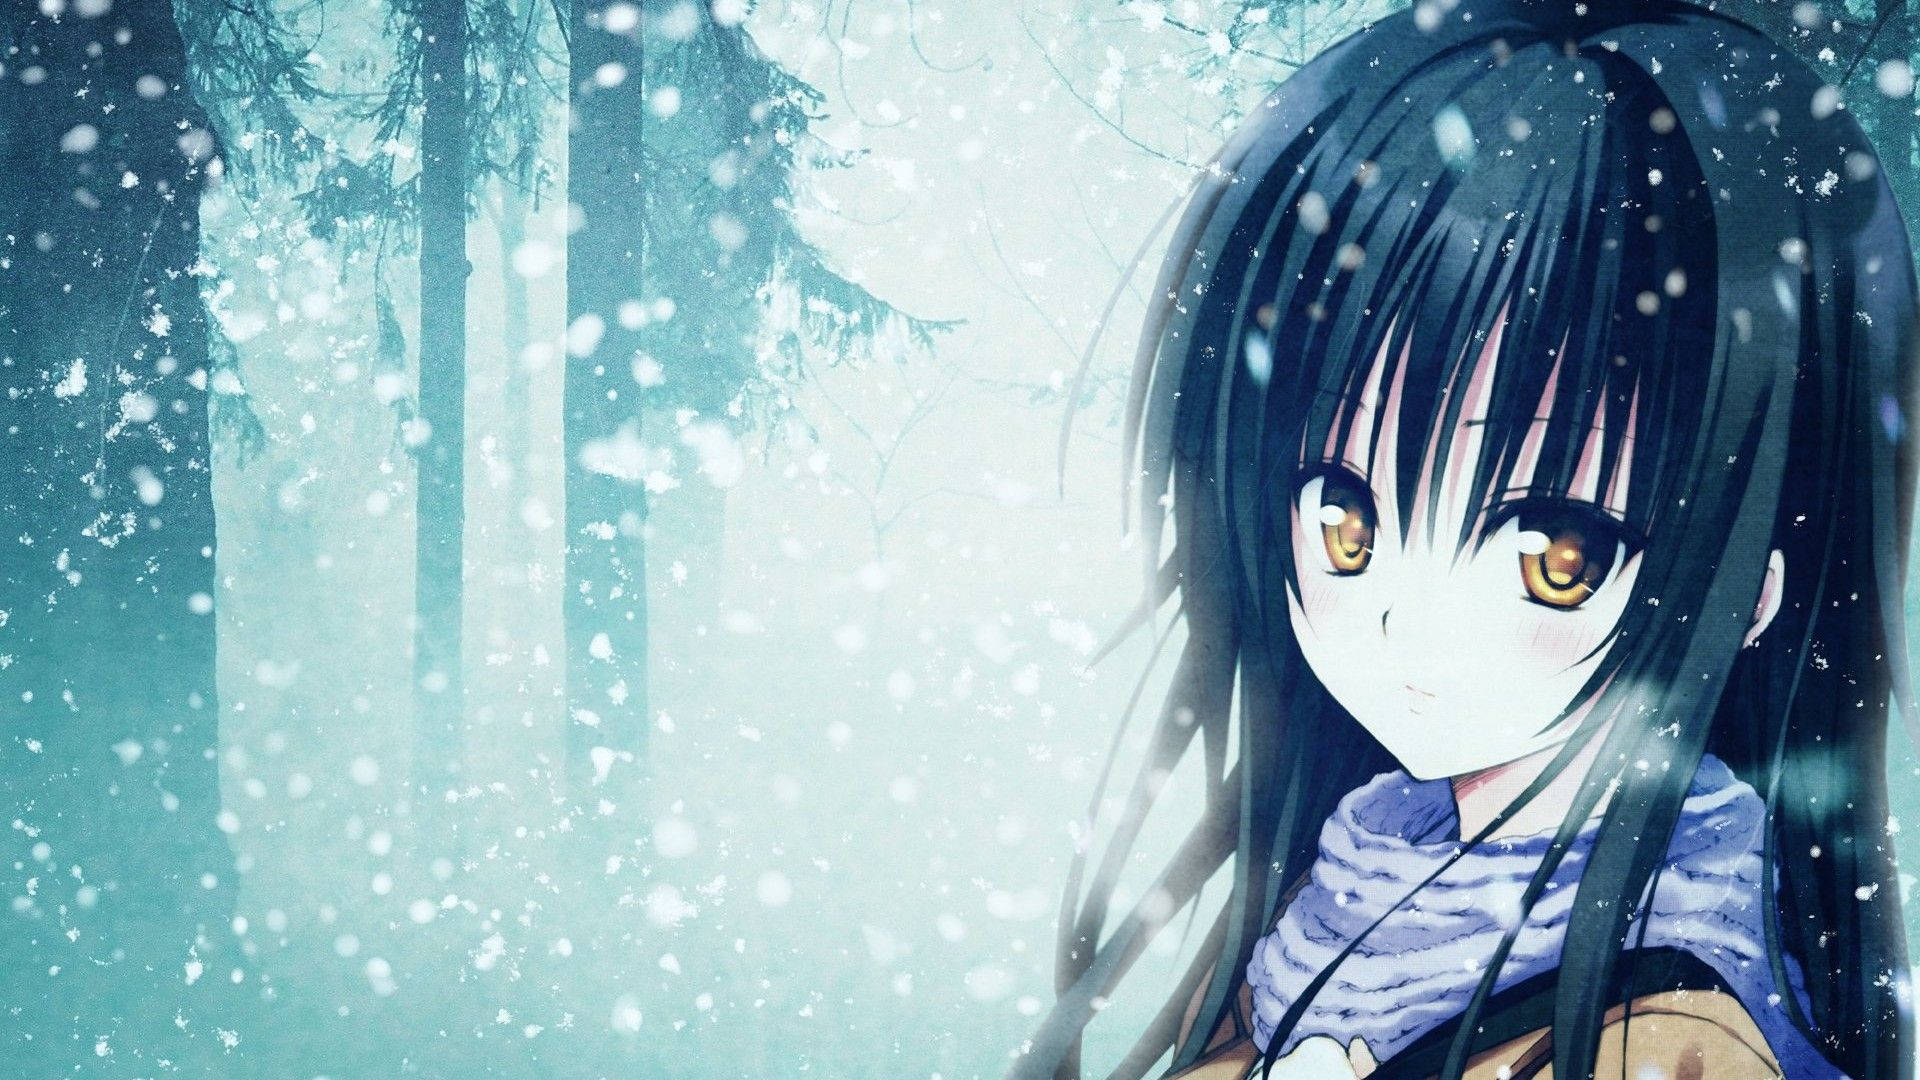 Anime Girl Sad Alone In Snowy Forest